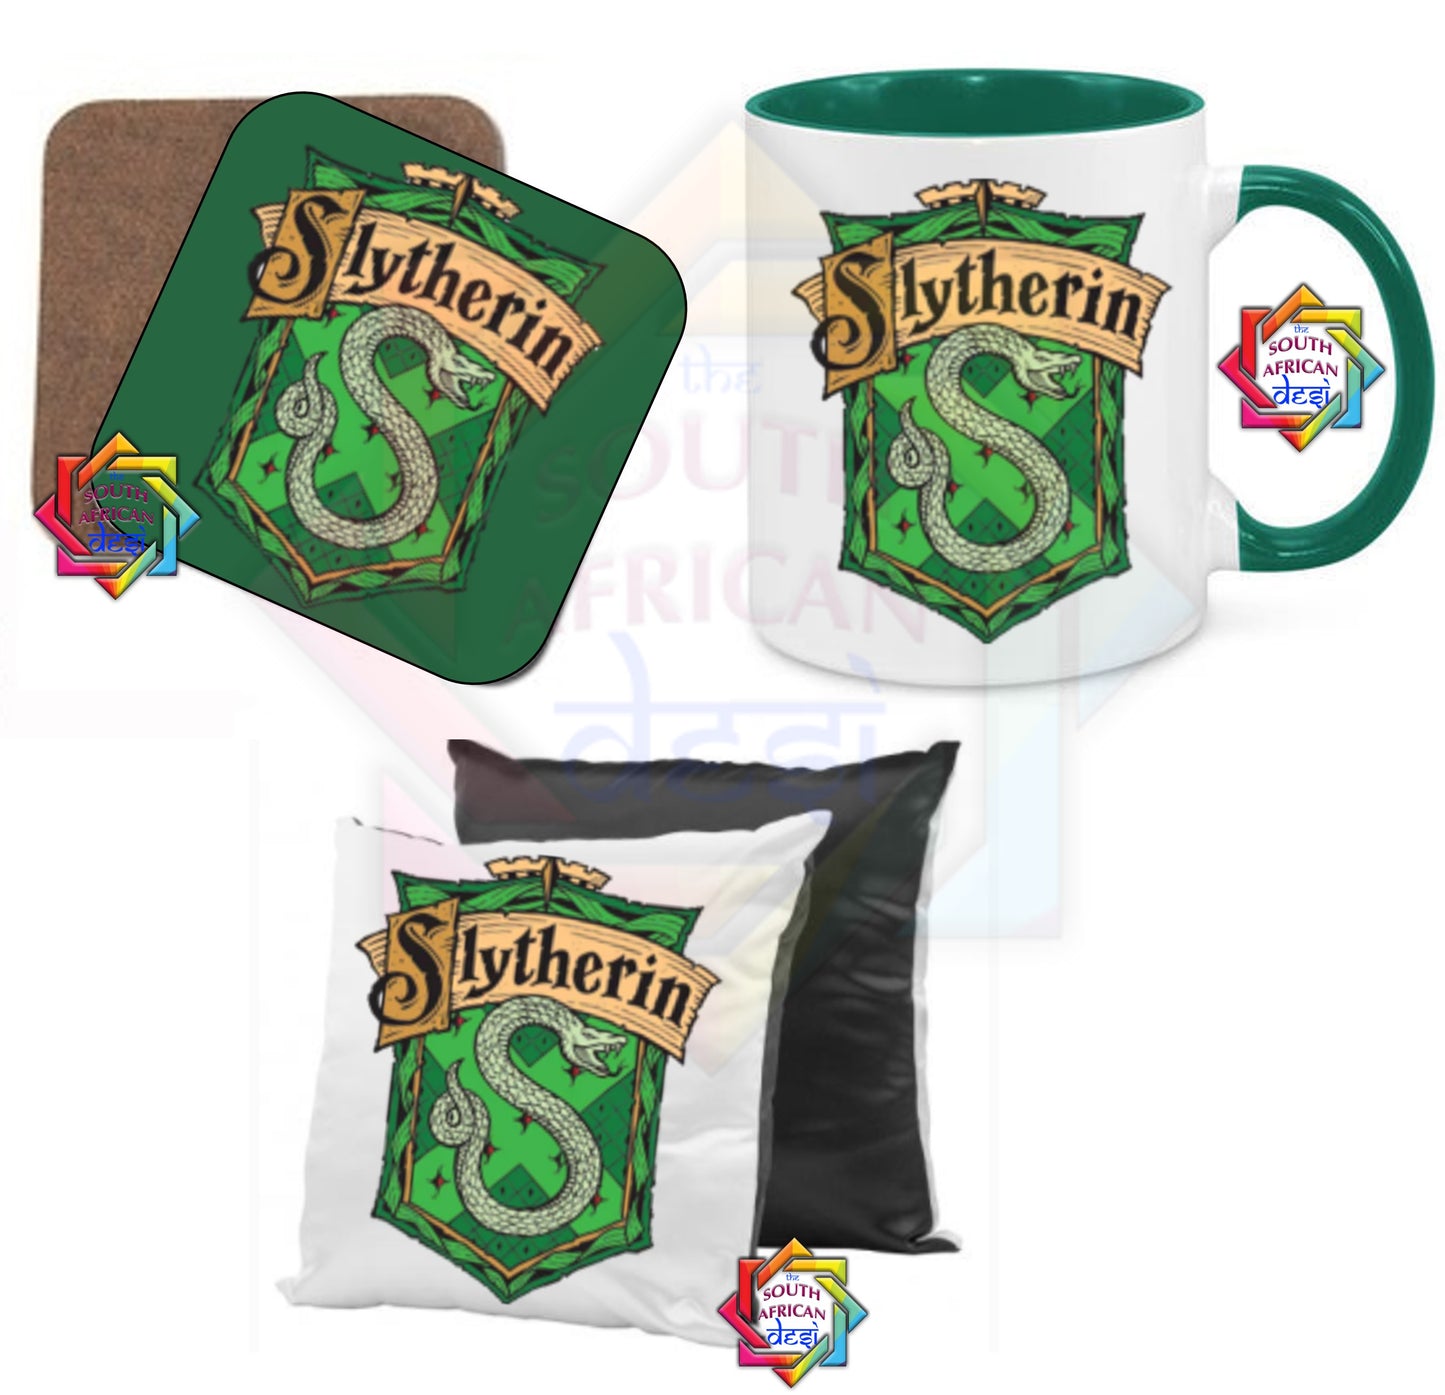 SLYTHERIN GIFT BOX - HARRY POTTER INSPIRED